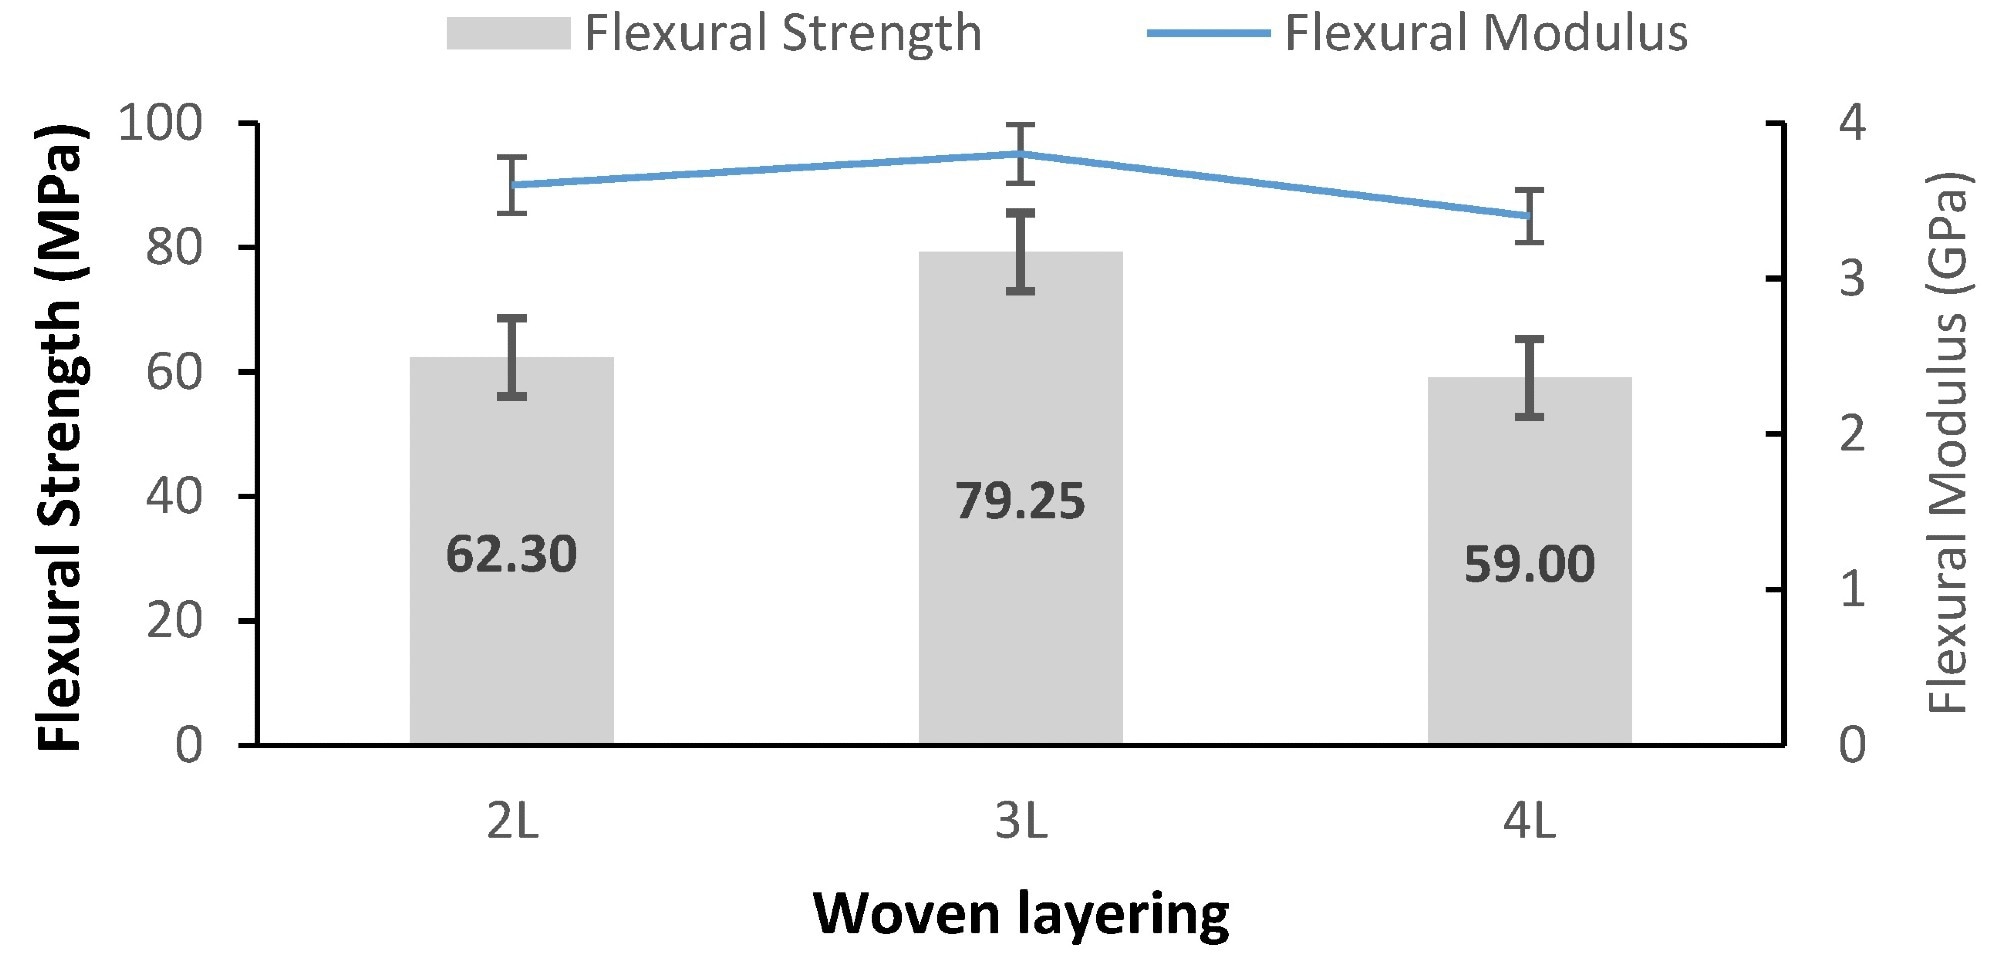 Flexural properties of woven PALF-reinforced epoxy composite at different layering numbers.